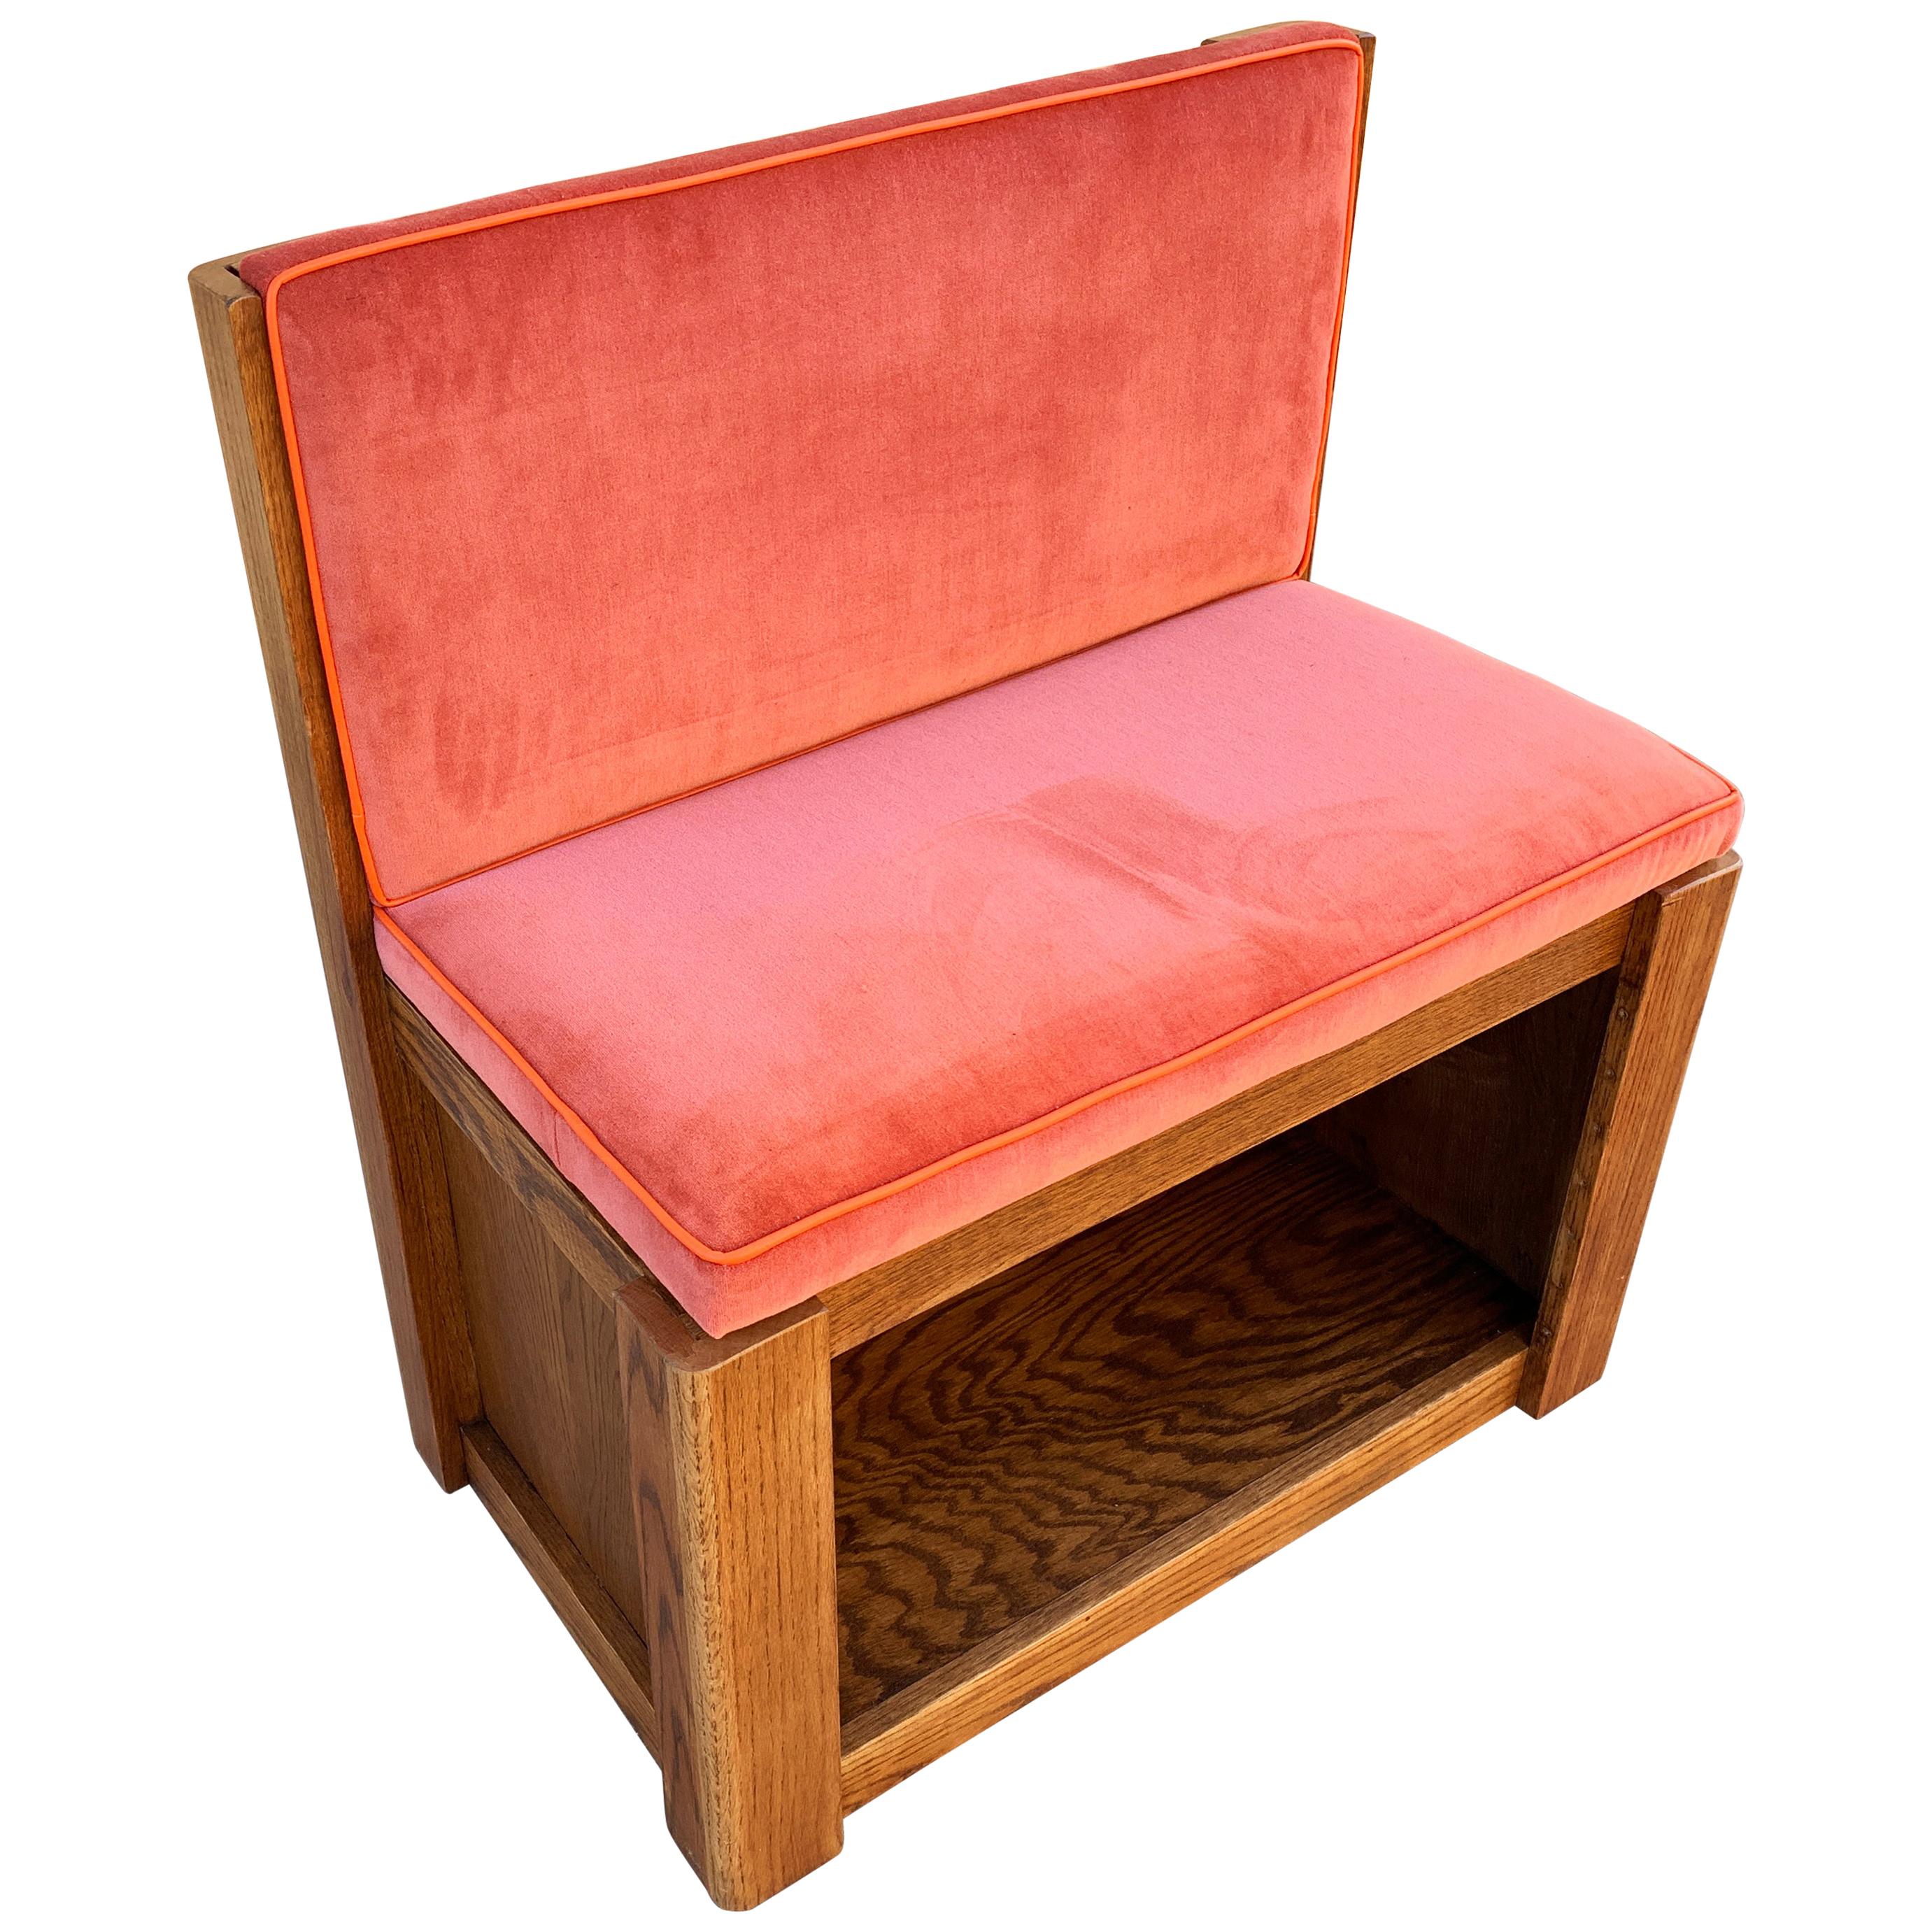 Vintage Oak Bench with Velvet Seat and Storage, Newly Upholstered